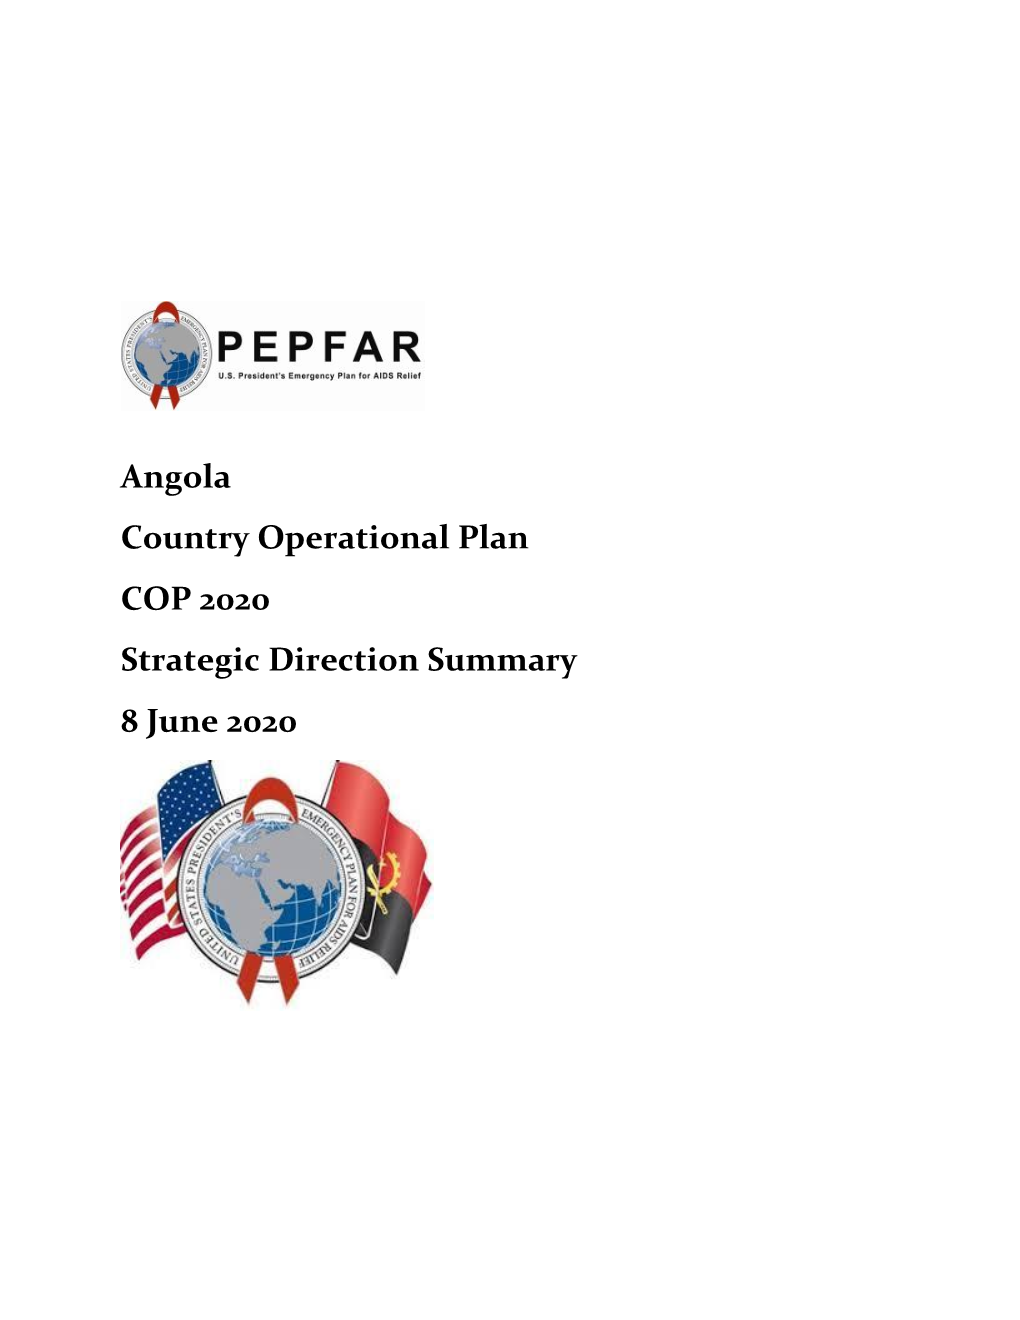 Angola Country Operational Plan COP 2020 Strategic Direction Summary 8 June 2020 Table of Contents